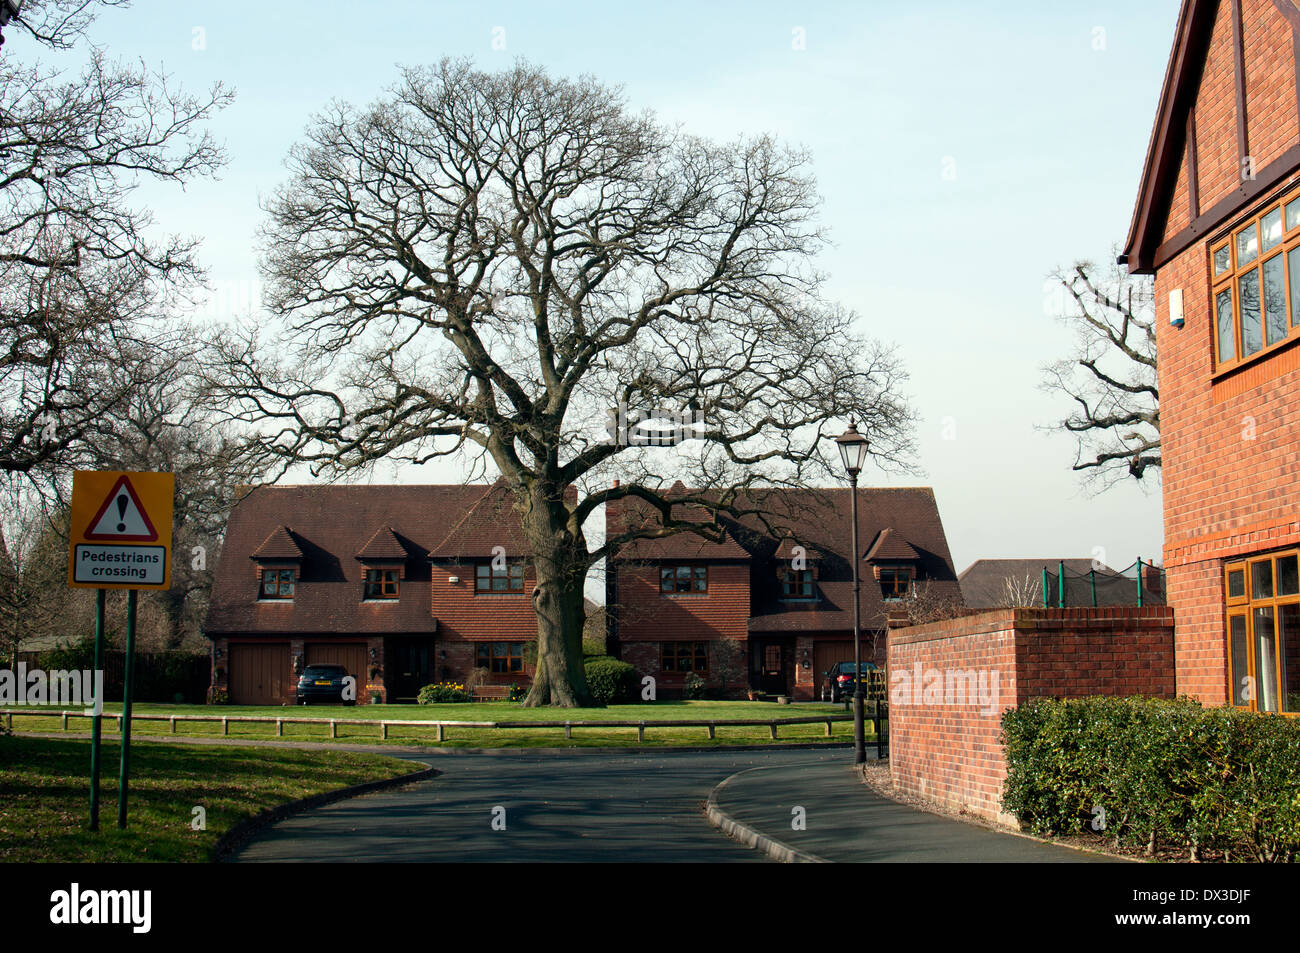 Mature oak tree and detached houses, Dickens Heath, West Midlands, England, UK Stock Photo